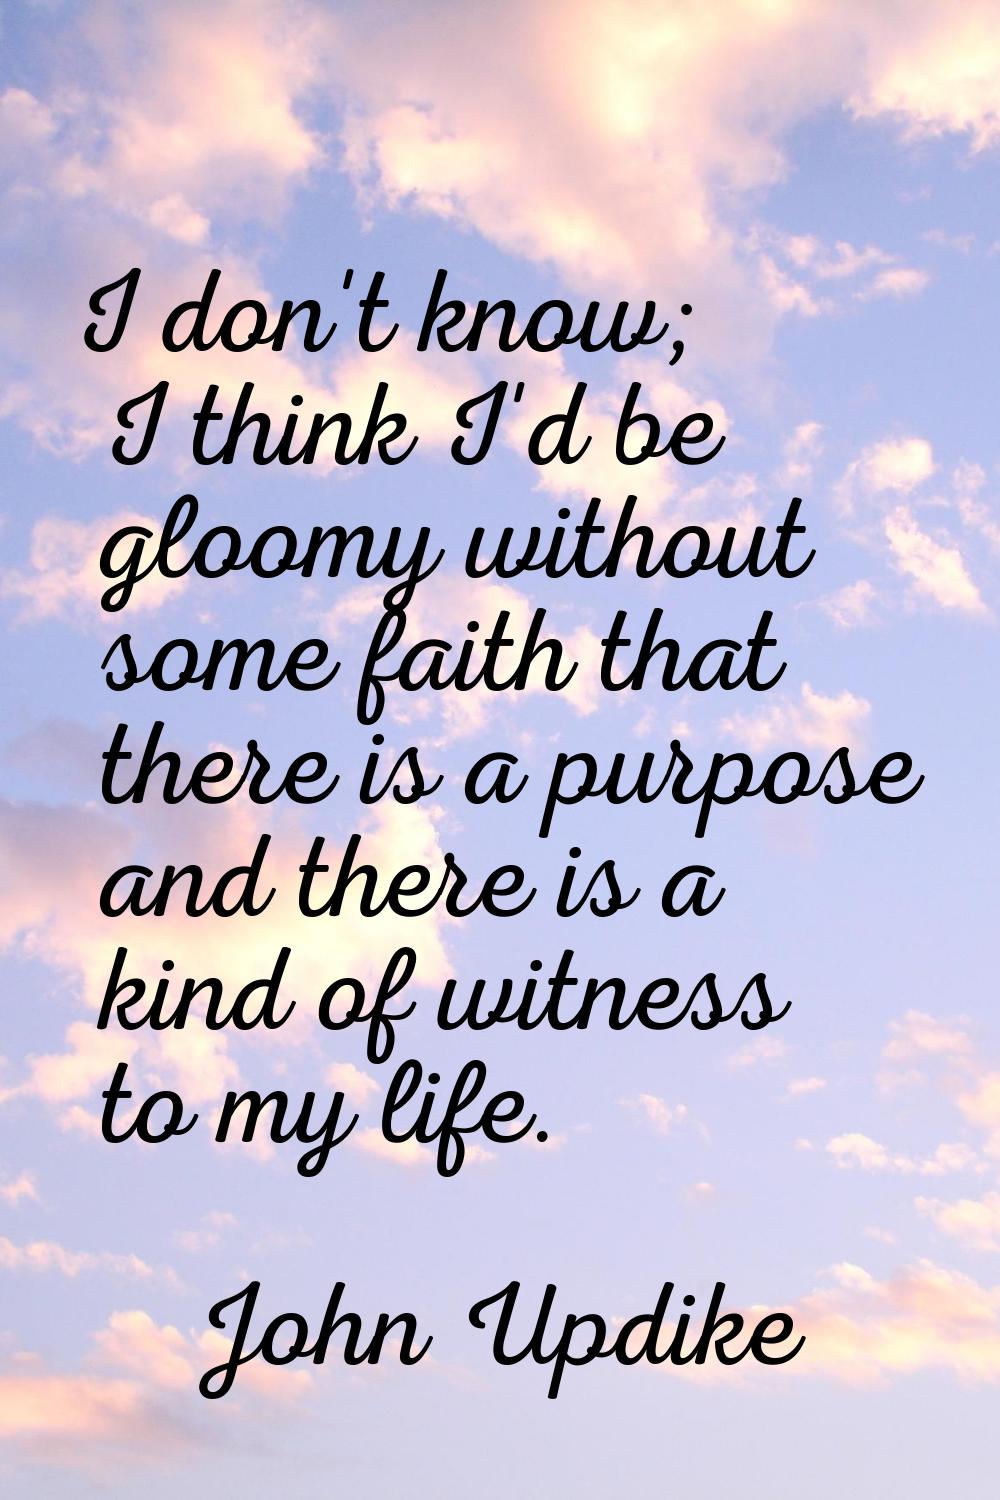 I don't know; I think I'd be gloomy without some faith that there is a purpose and there is a kind 